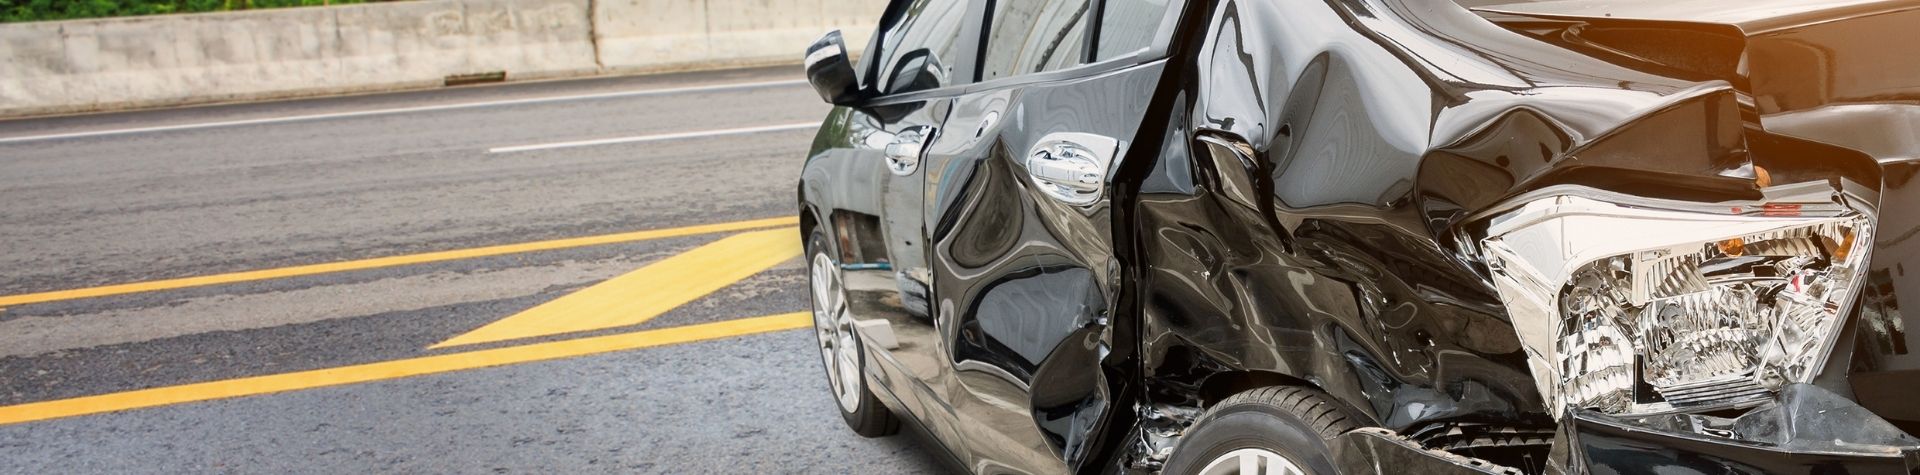 delaware county car accident lawyers